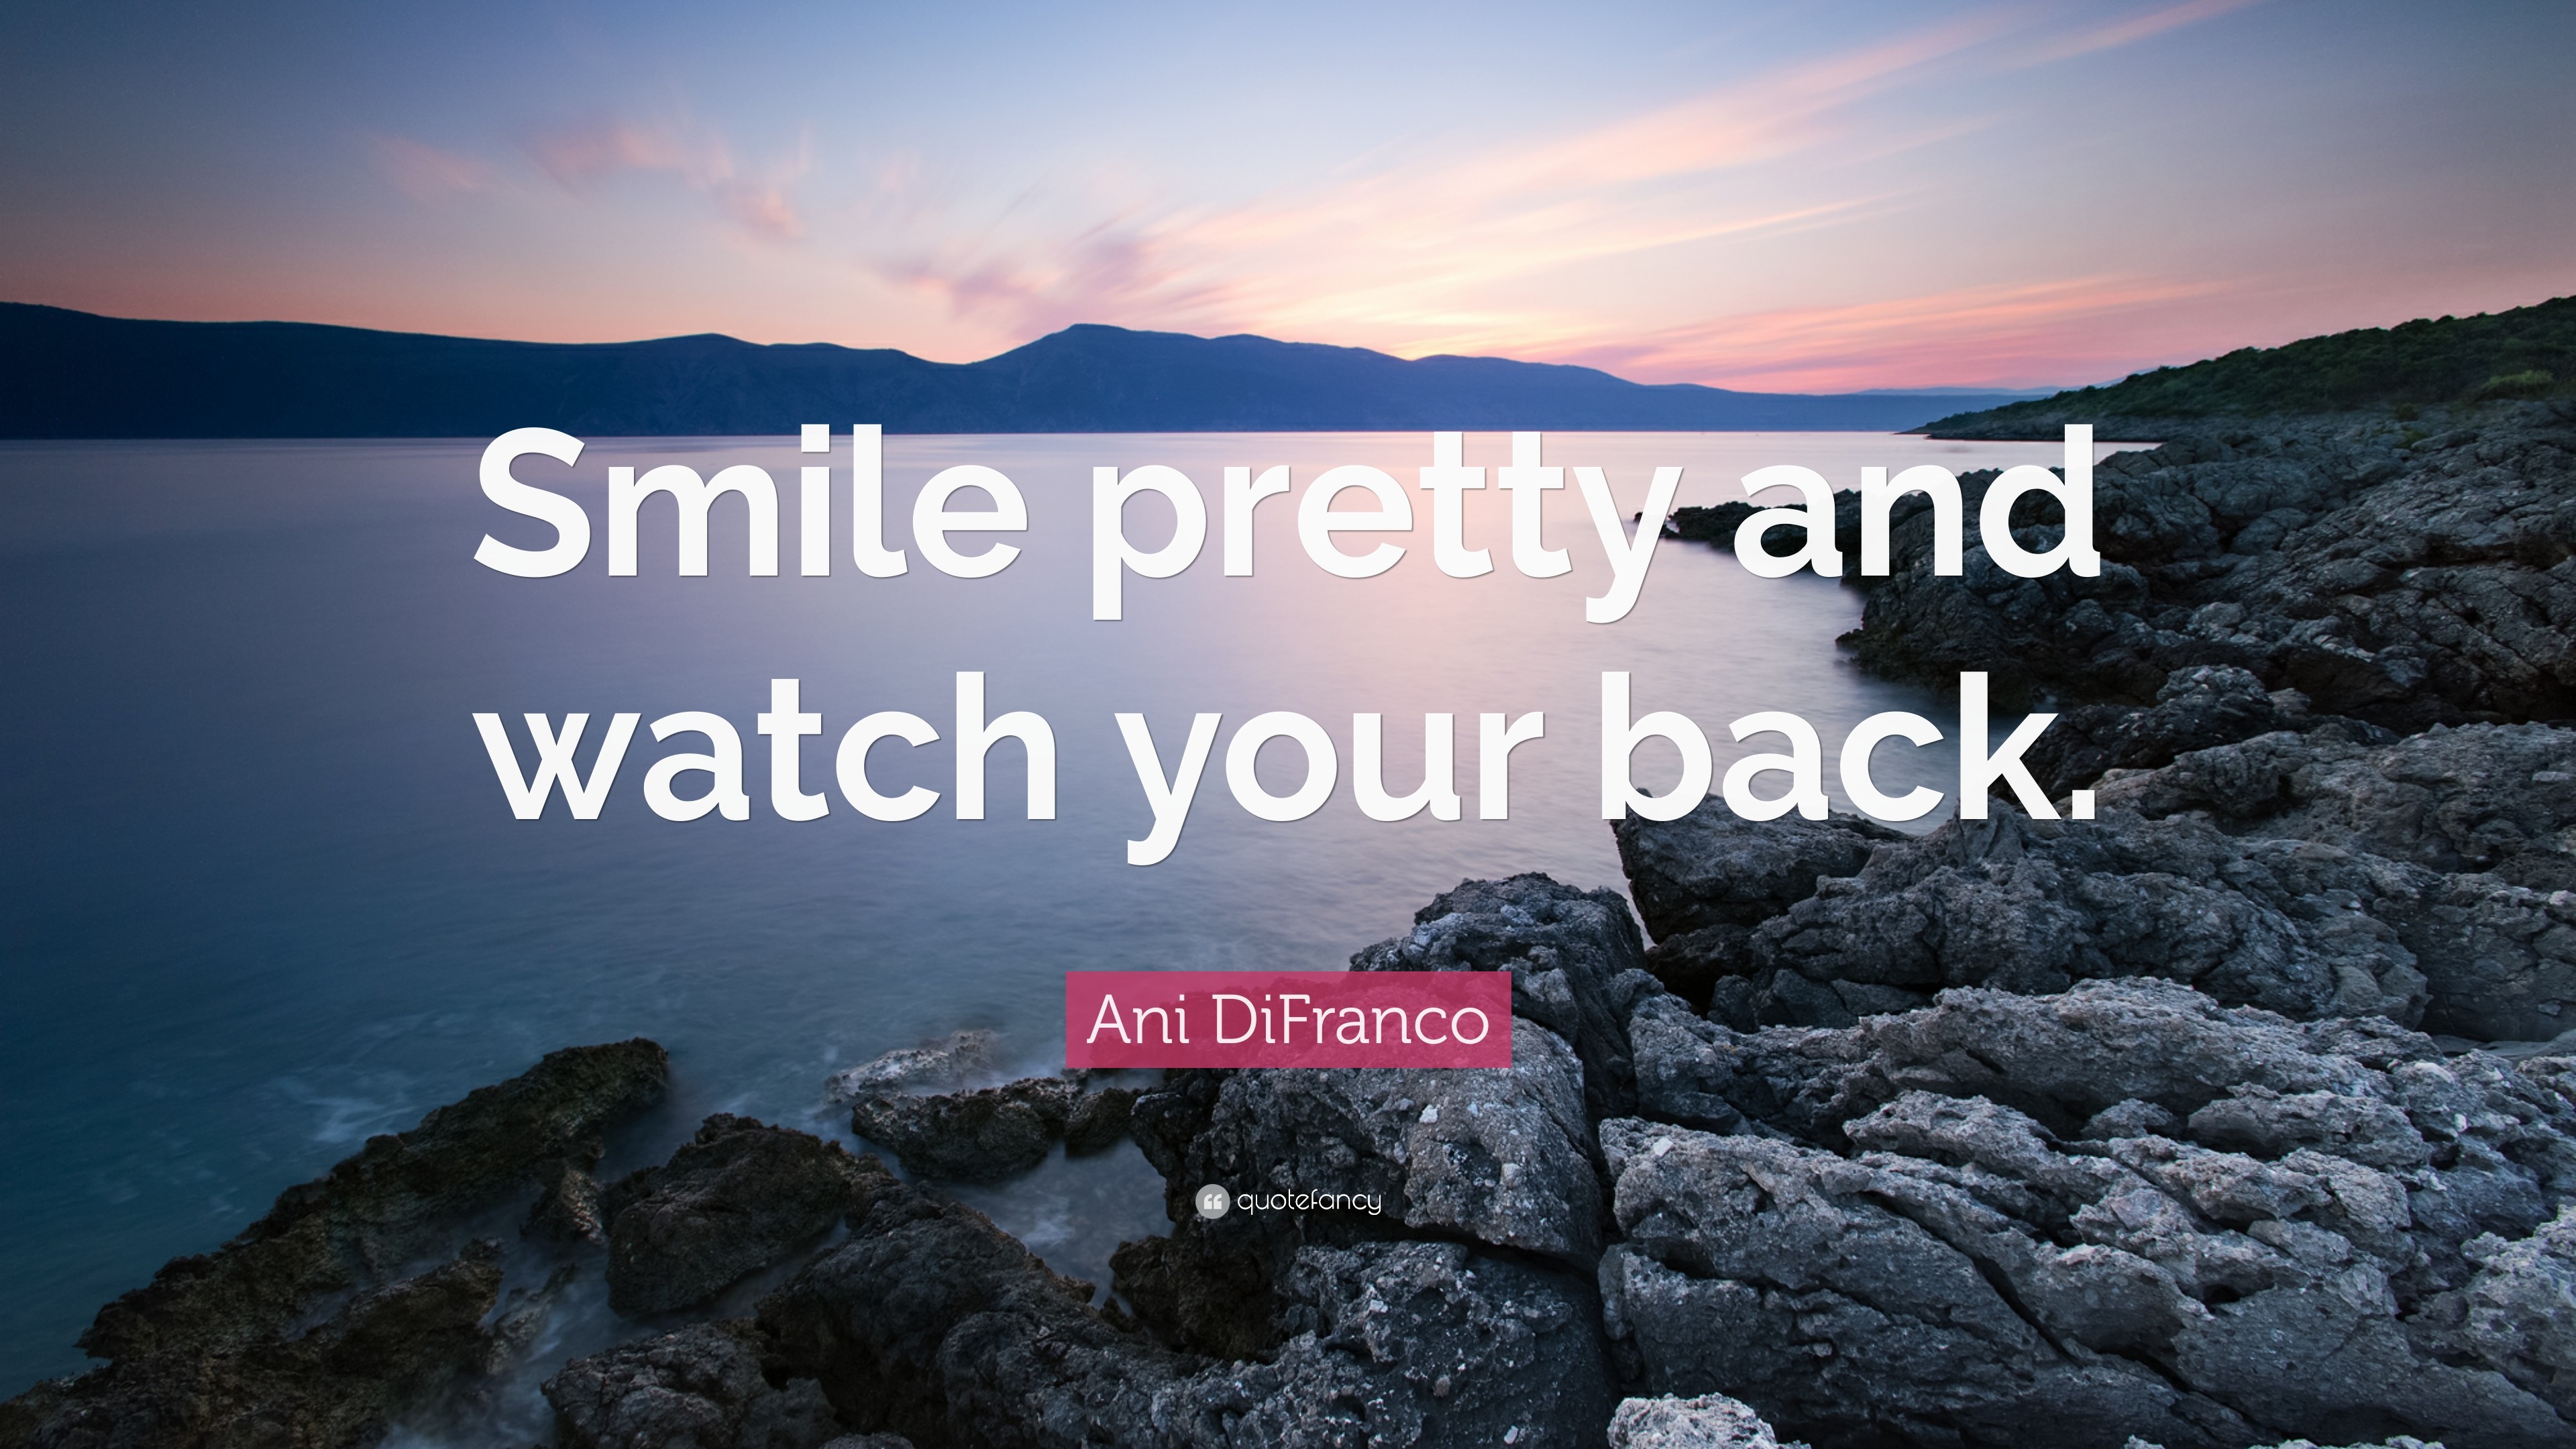 3840x2160 Ani DiFranco Quote: “Smile pretty and watch your back.”